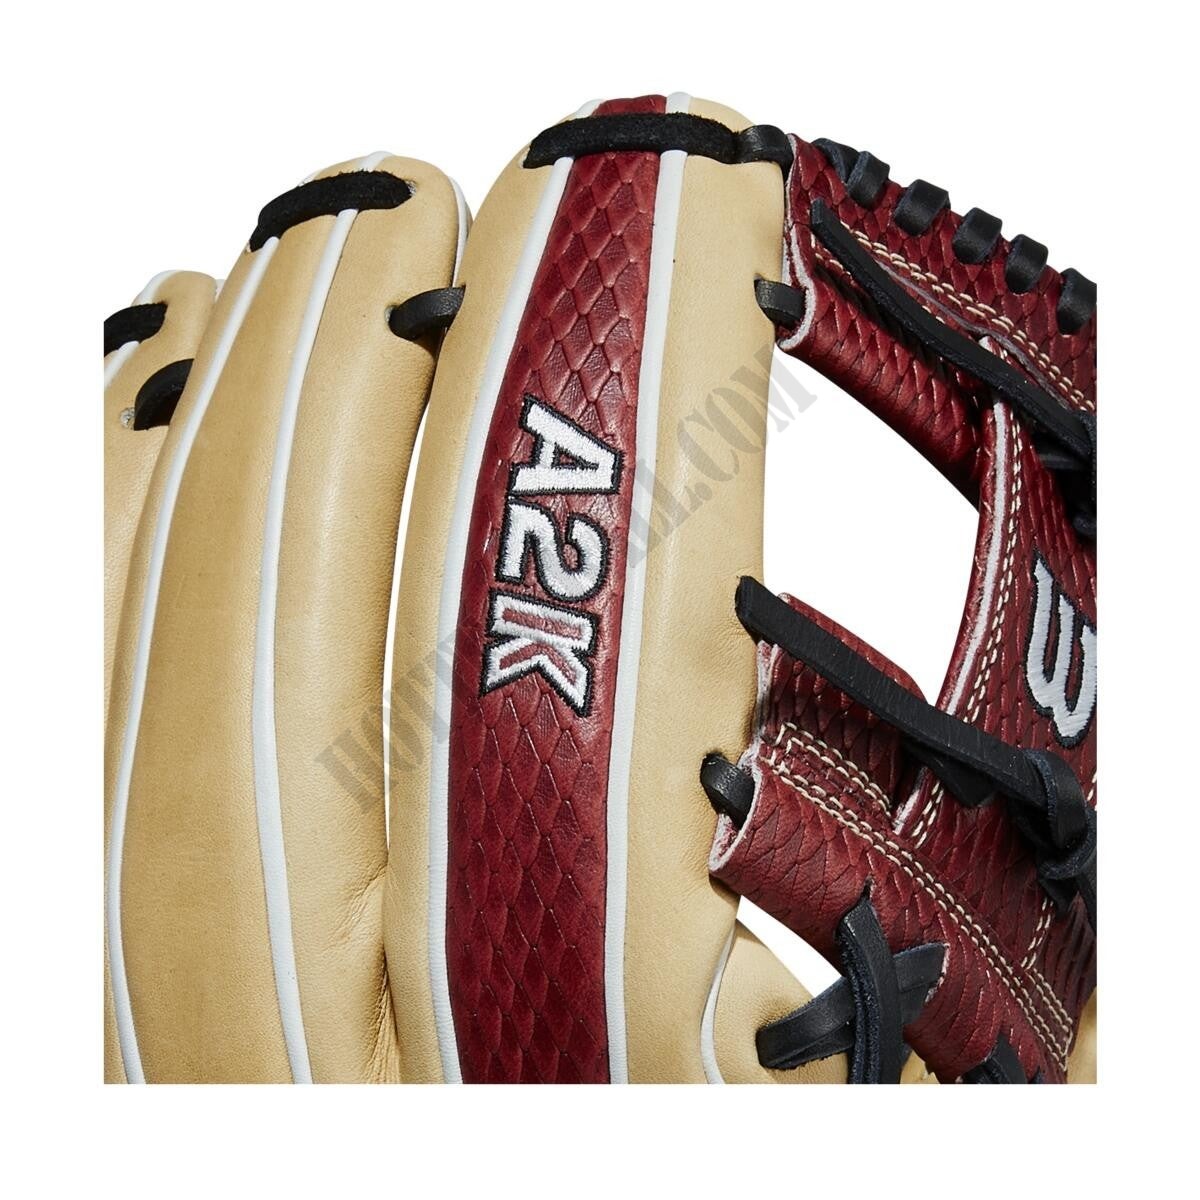 2021 A2K 1786 11.5" Infield Baseball Glove - Limited Edition ● Wilson Promotions - -6